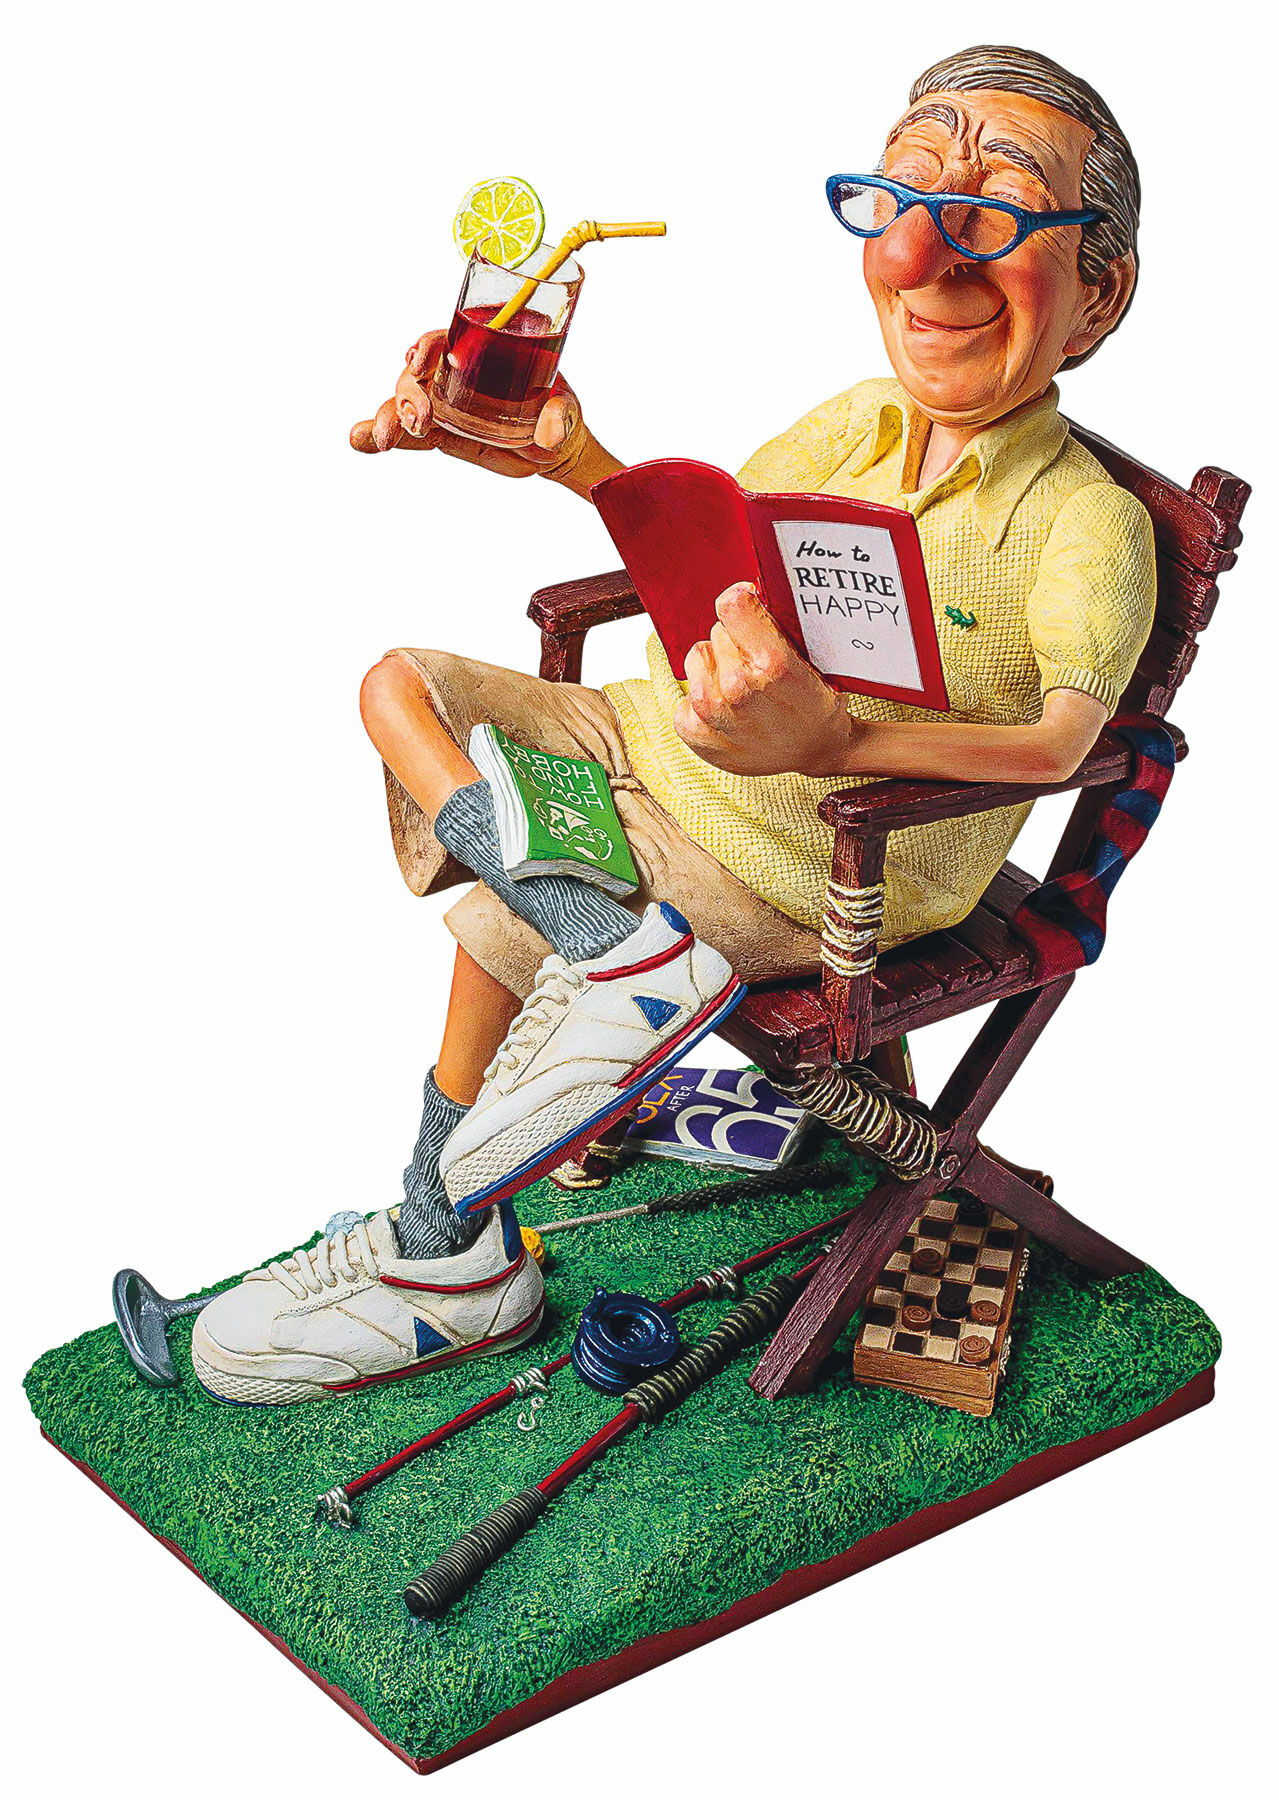 Caricature "The Good Years", cast hand-painted by Guillermo Forchino